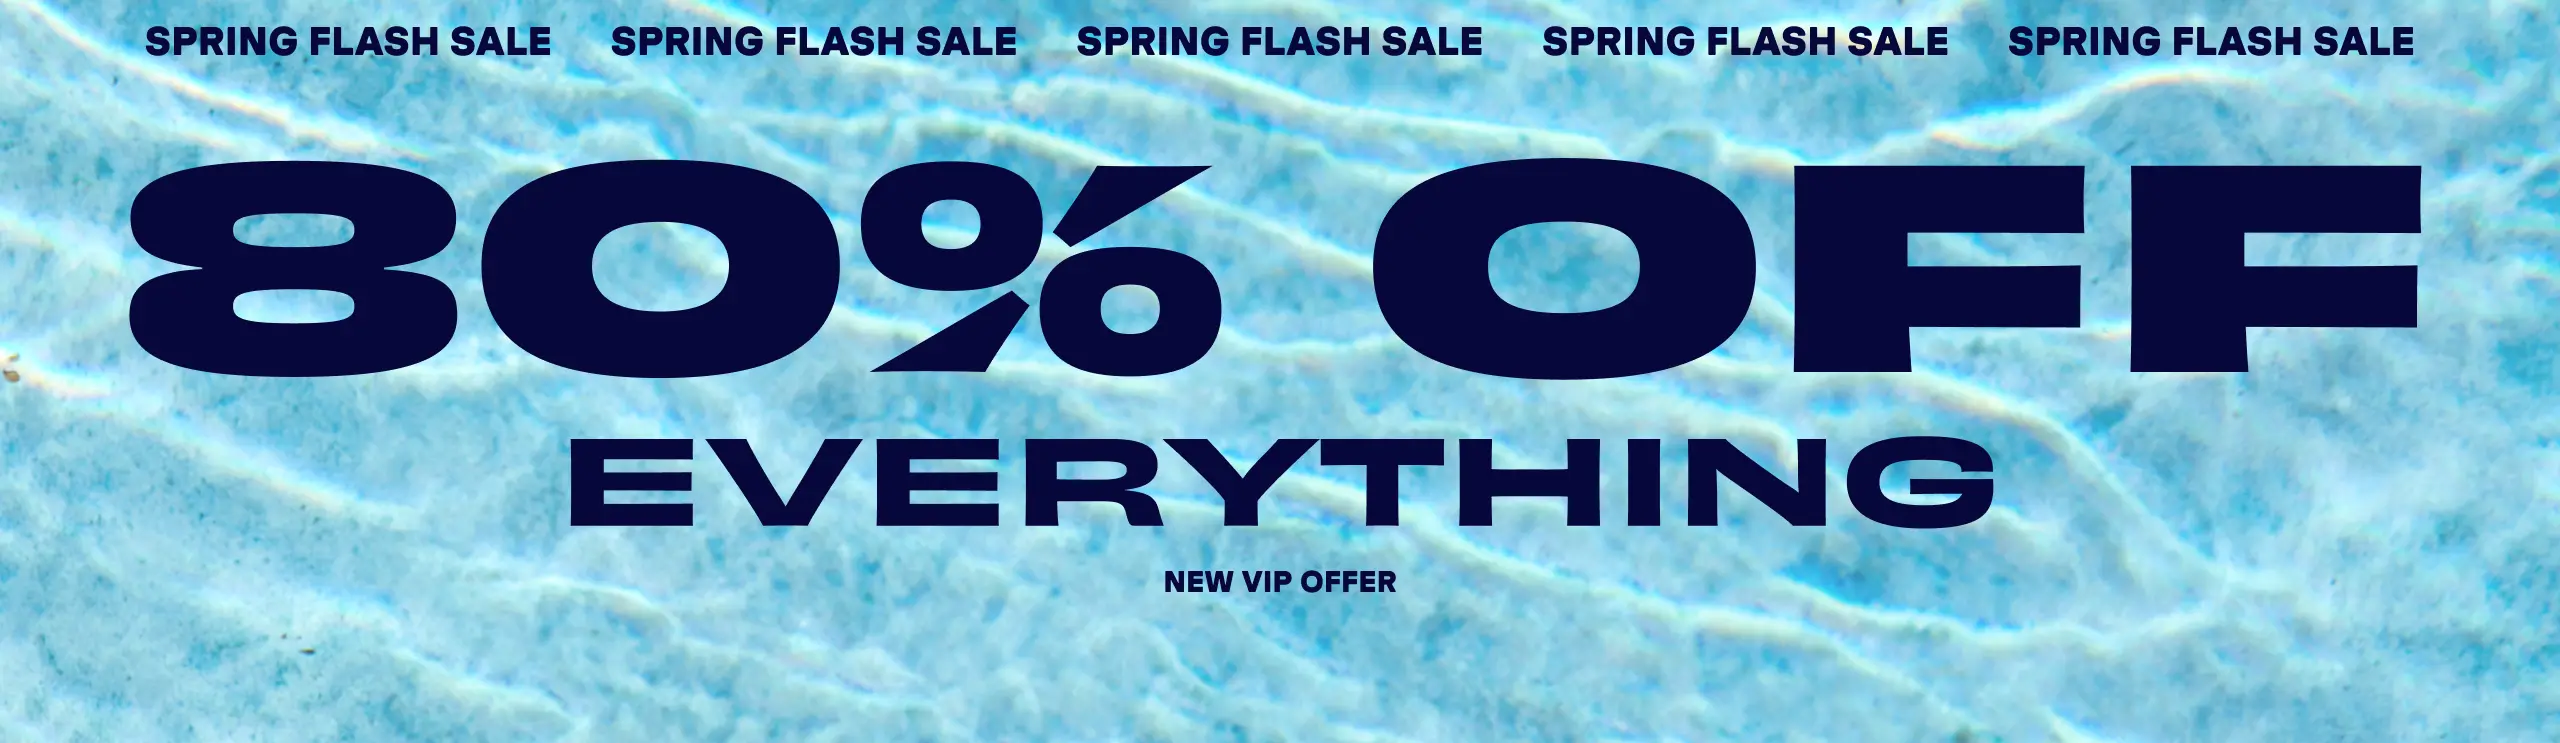 Spring Flash Sale! 80% Off everything! New VIP Offer.